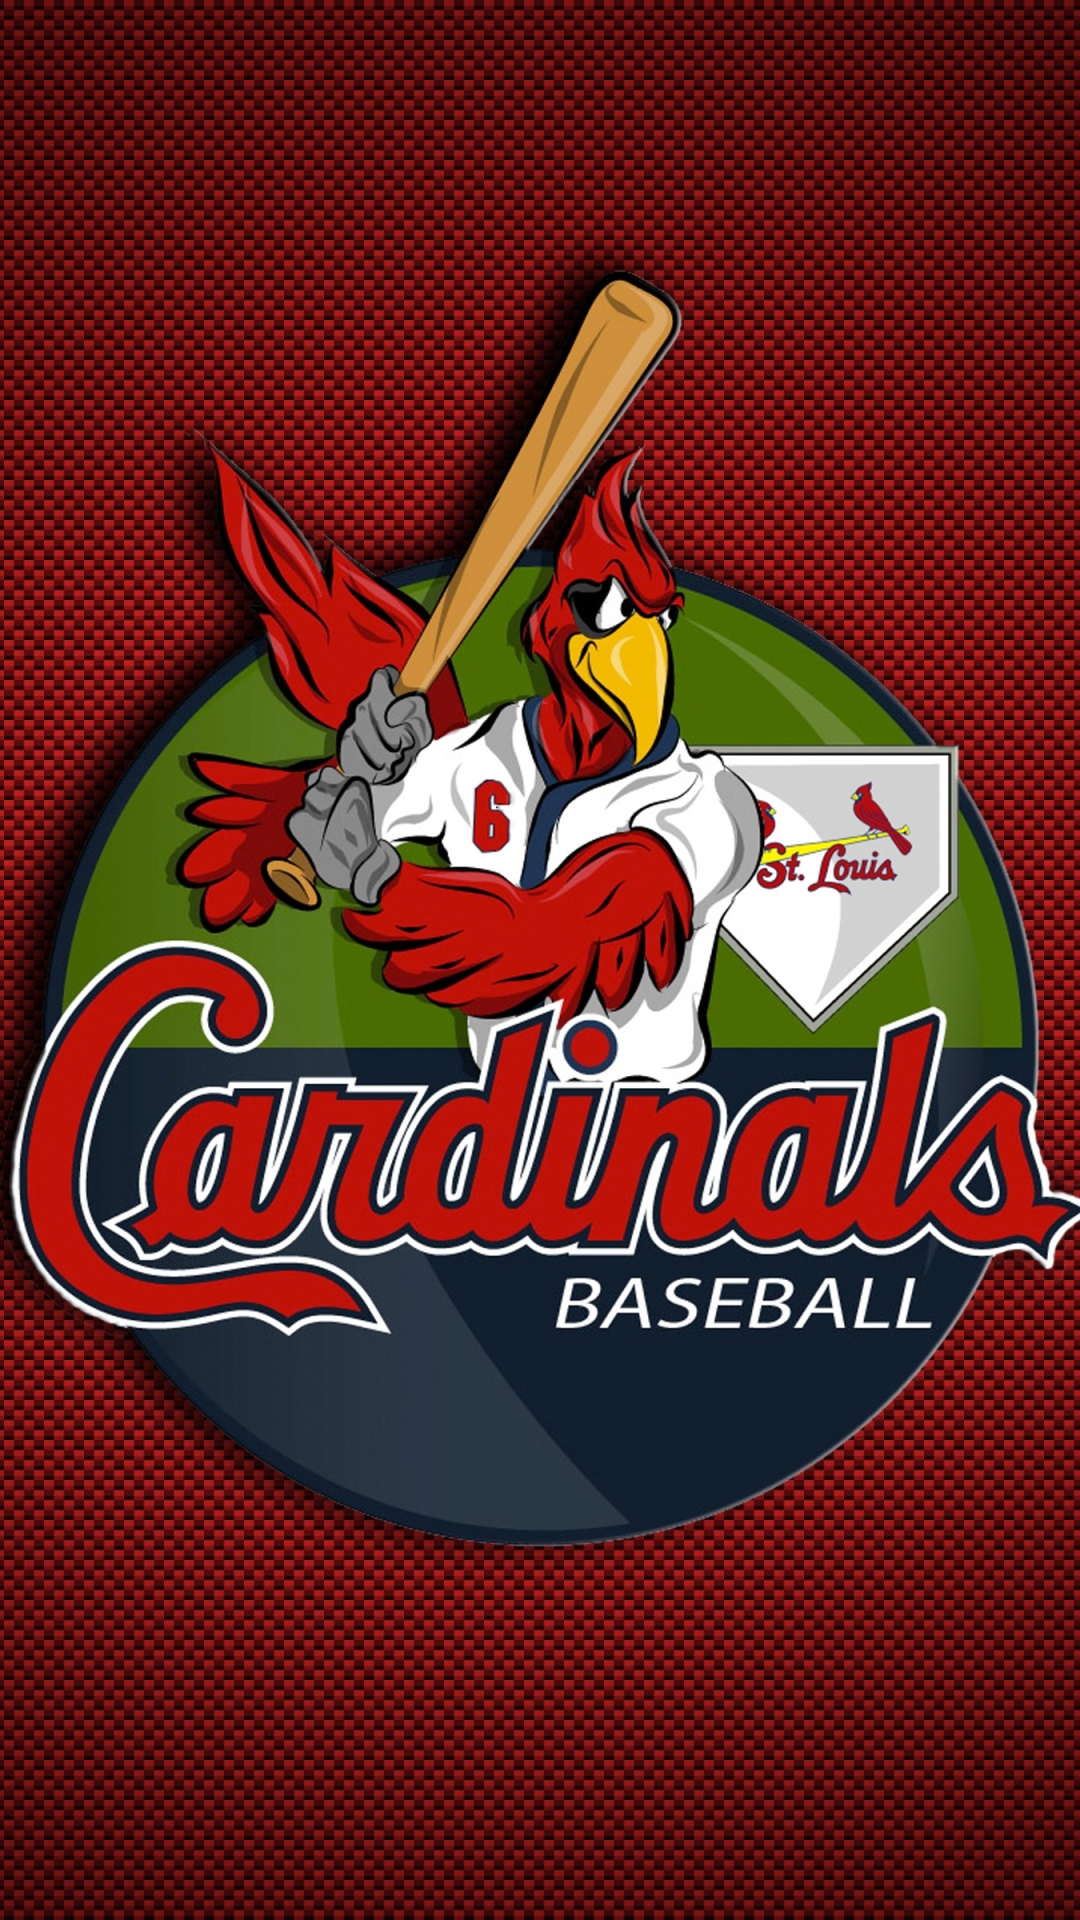 And the wallpaper . St. louis cardinals